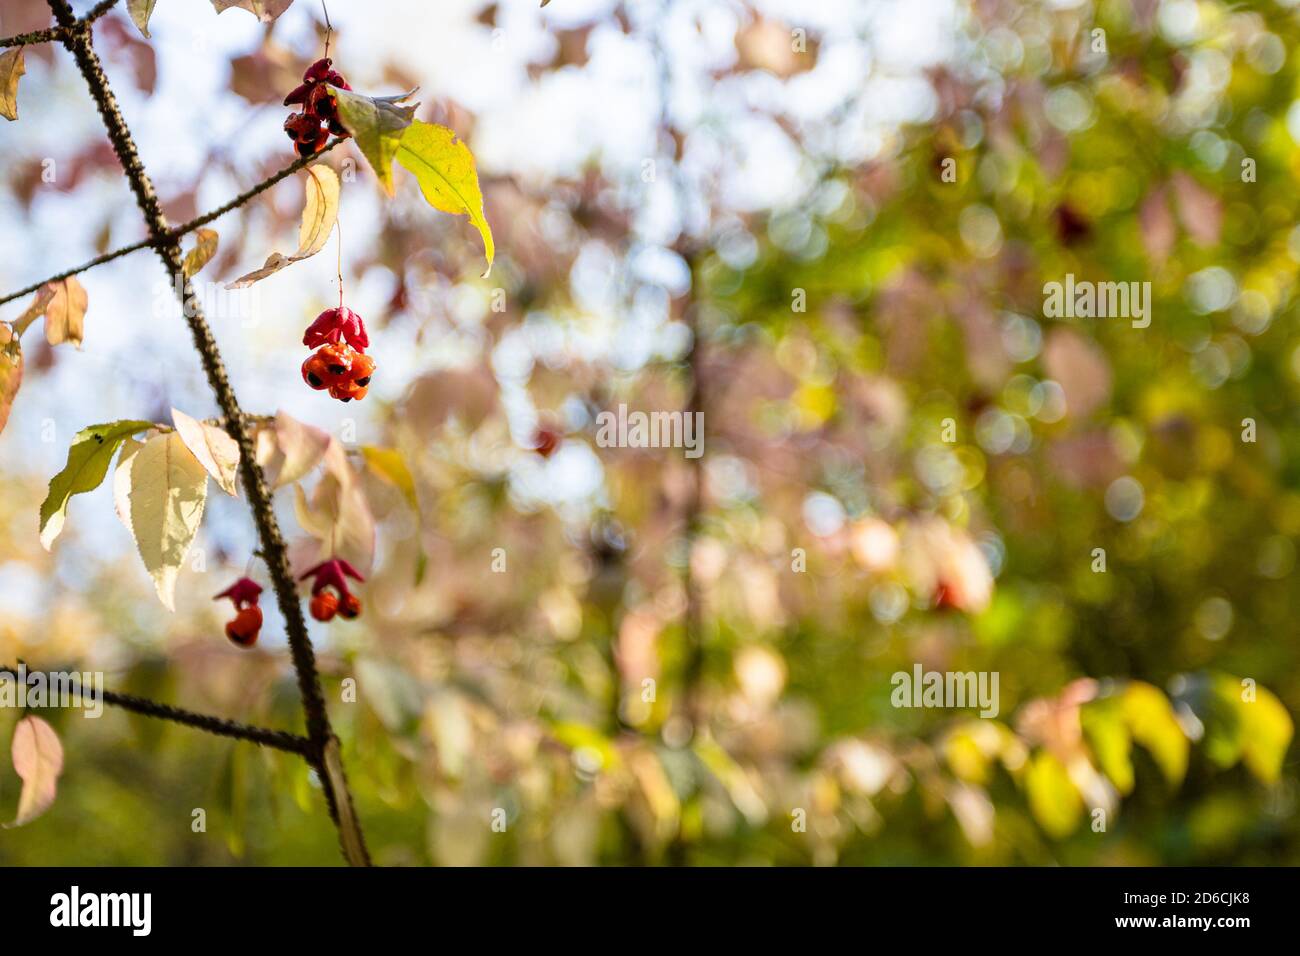 twig with Euonymus berries close up and blurred trees on background in city park on sunny autumn day (focus on berries on foreground) Stock Photo